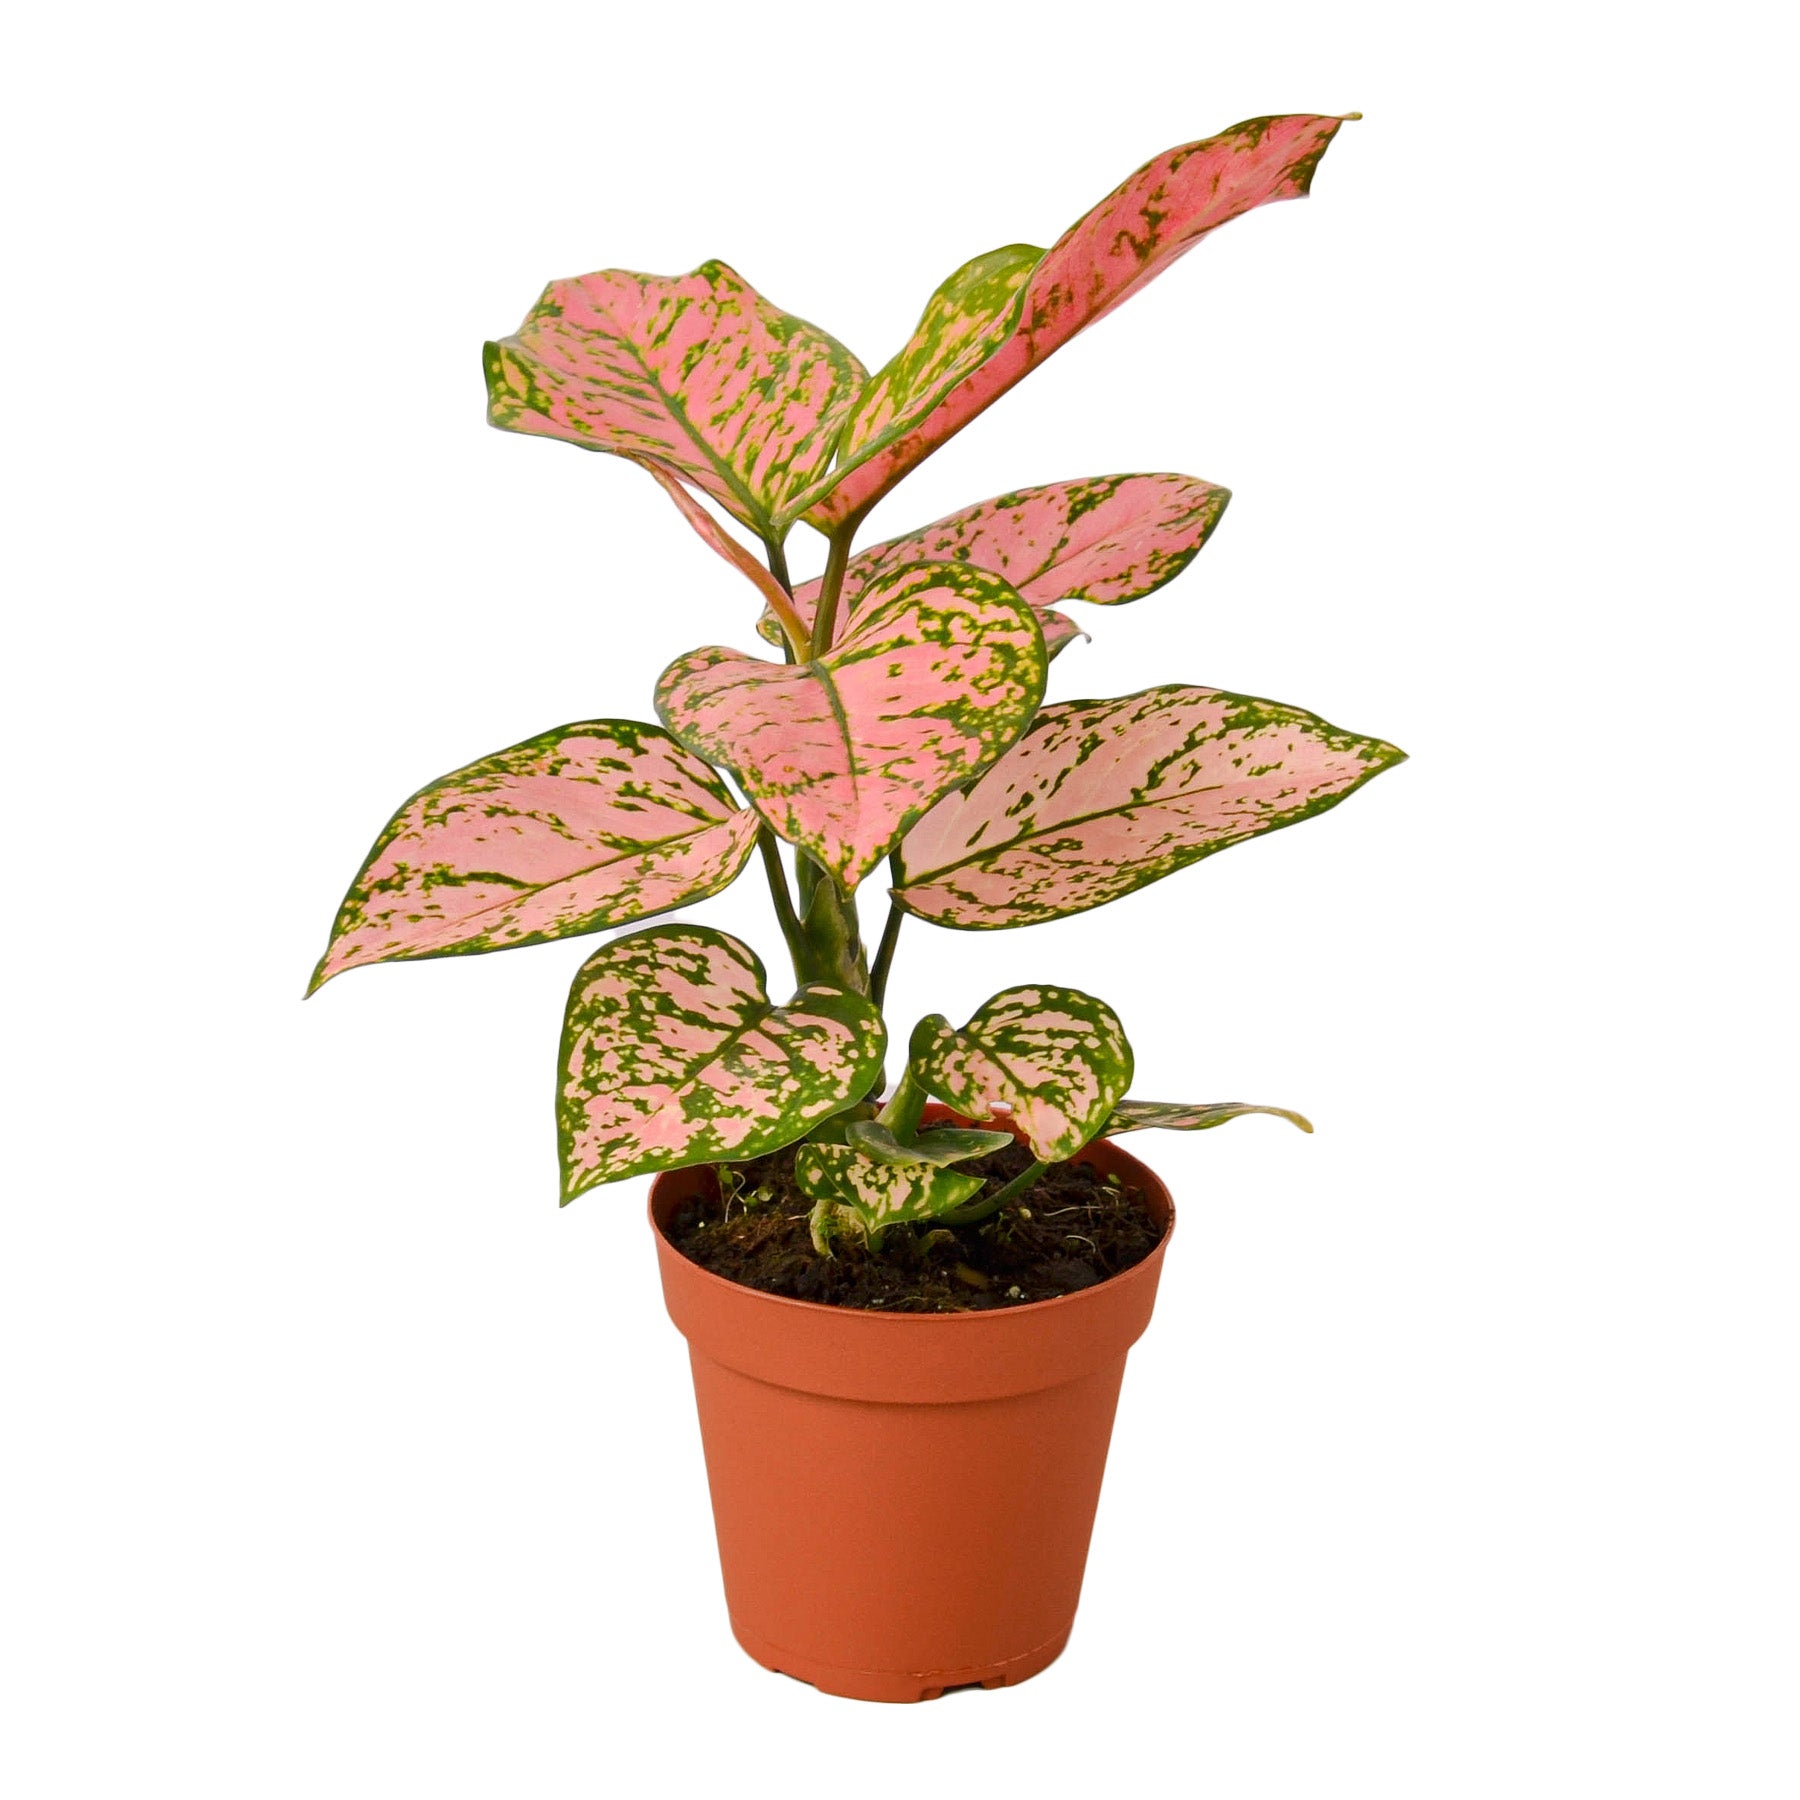 A vibrant pink and green plant in a pot on a clean white background, perfect for the best plant nursery near me.